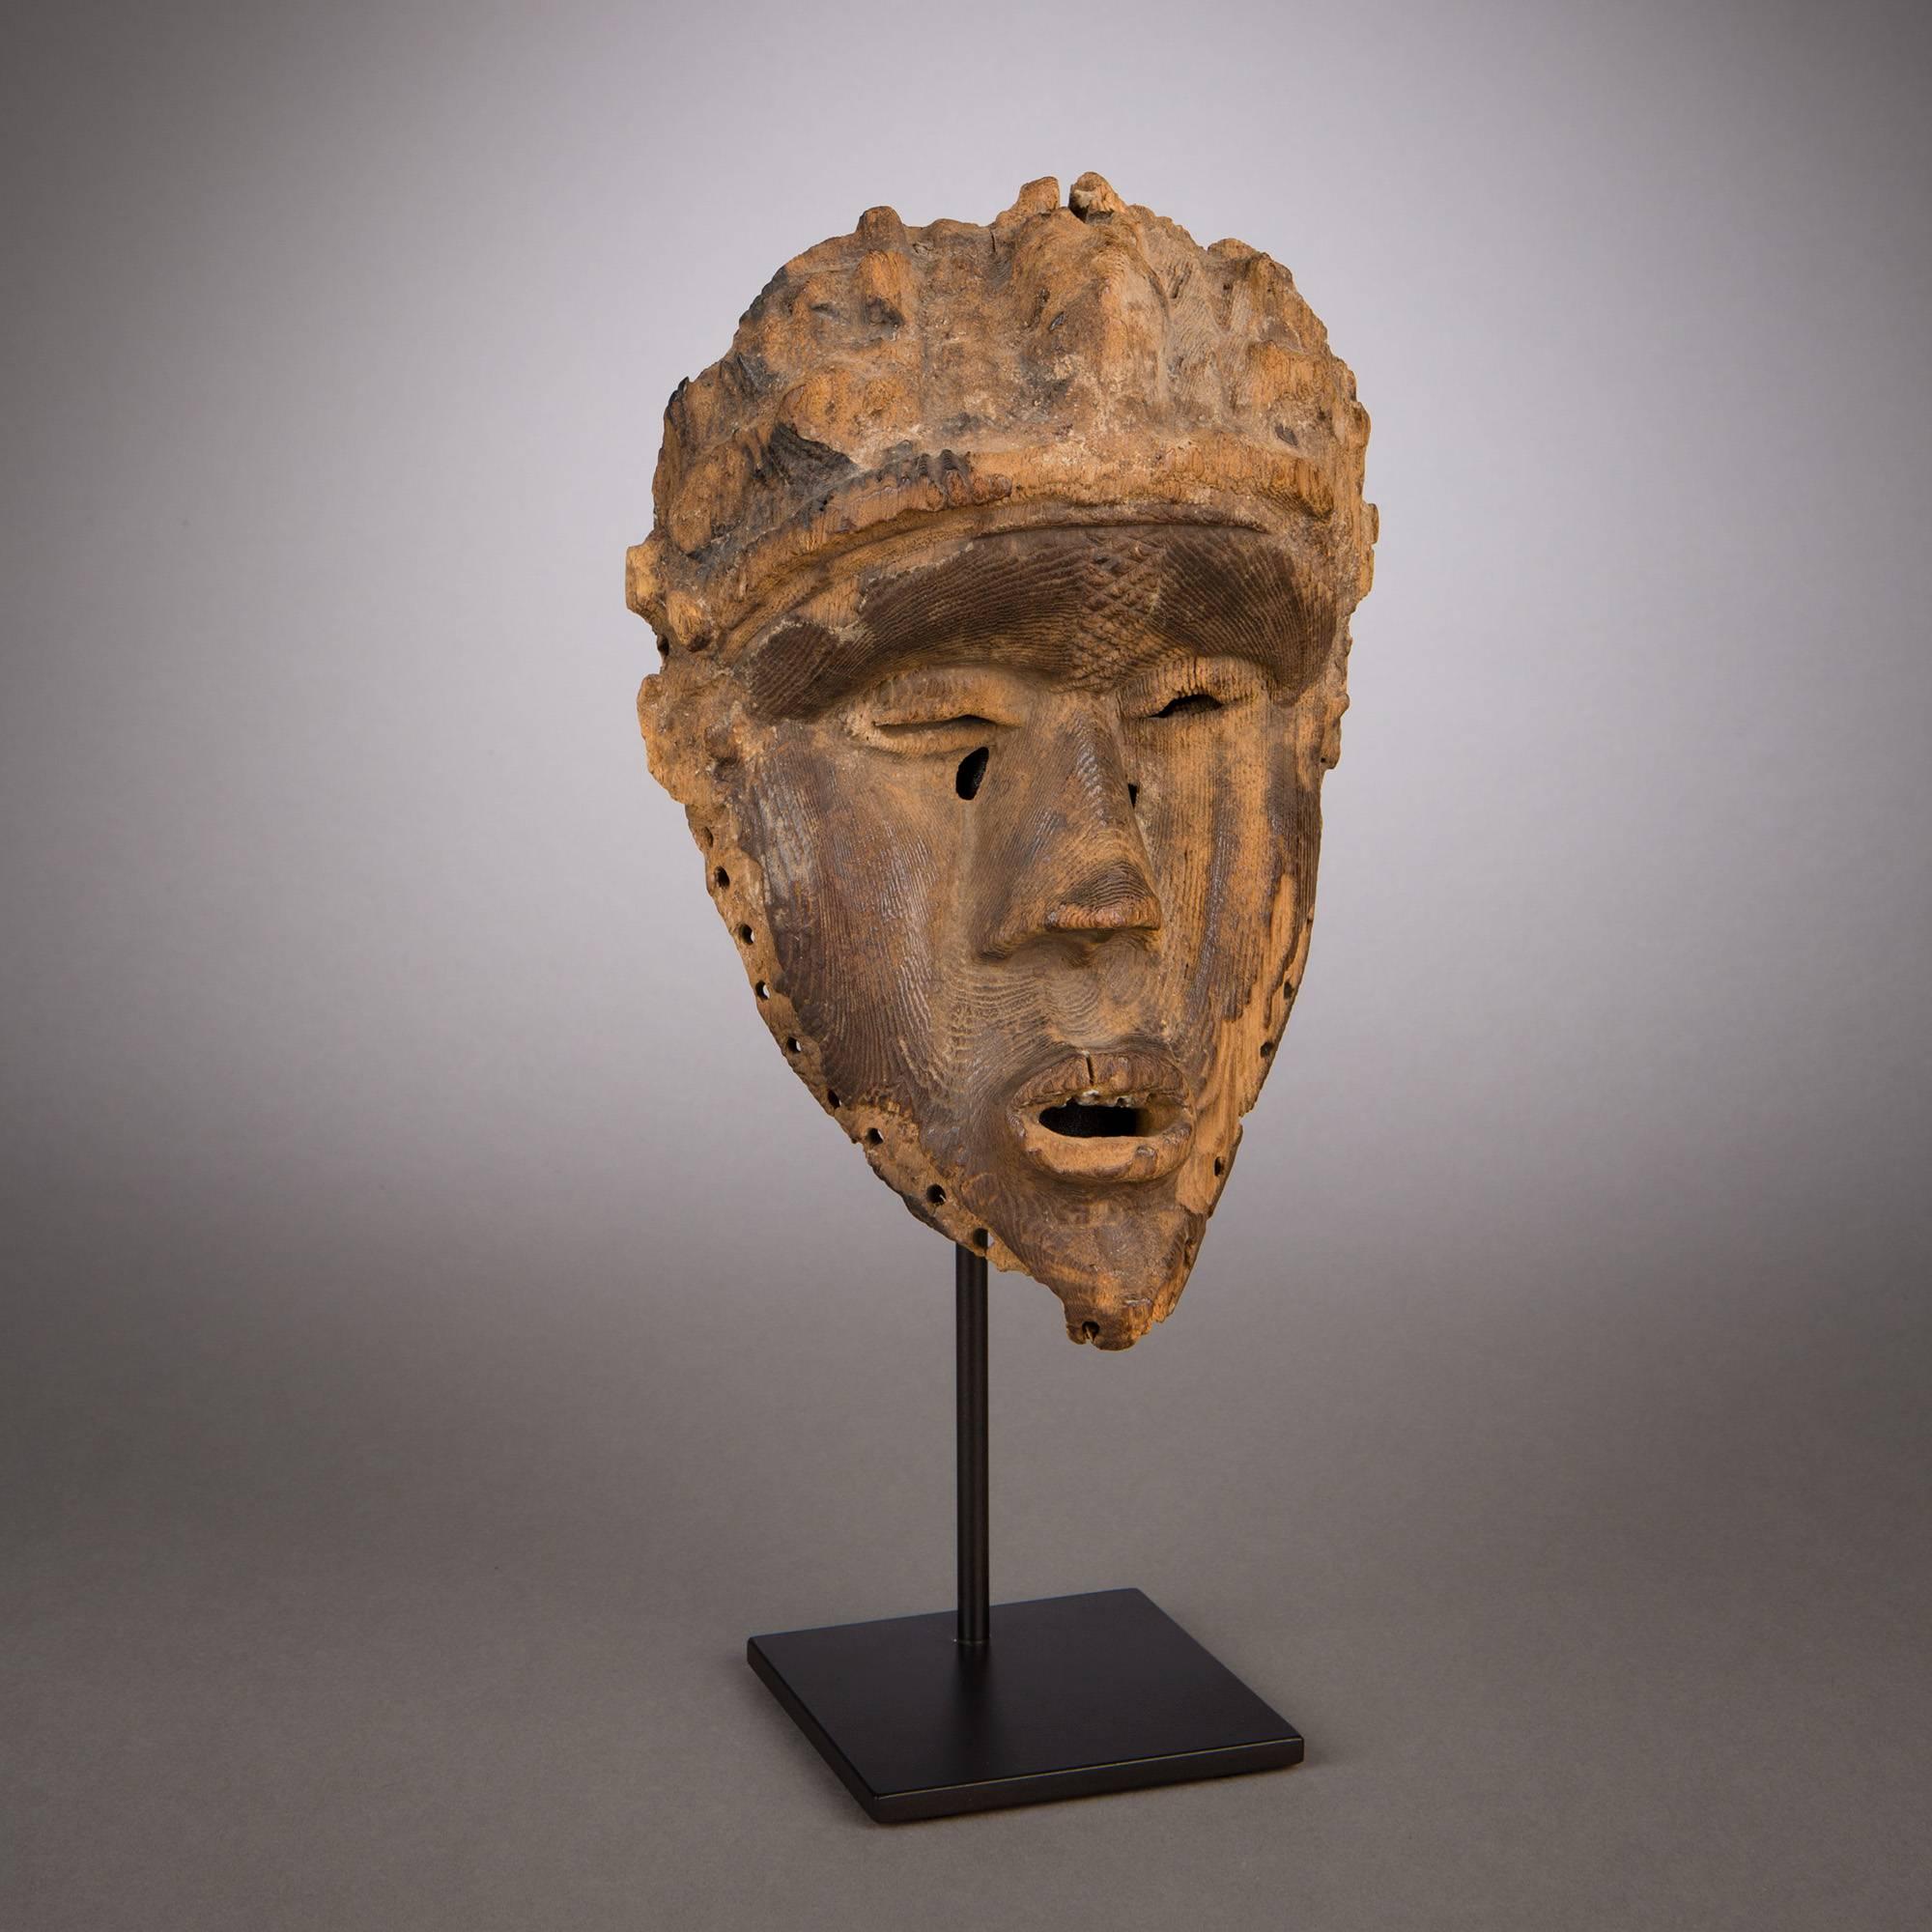 Bearing the deeply indented profile so Classic in Bassa masks, this superbly carved piece shows finely executed facial features, prominent cheekbones, and a jutting forehead surmounted by a coiffure. A vertical band of fine relief patterns runs up